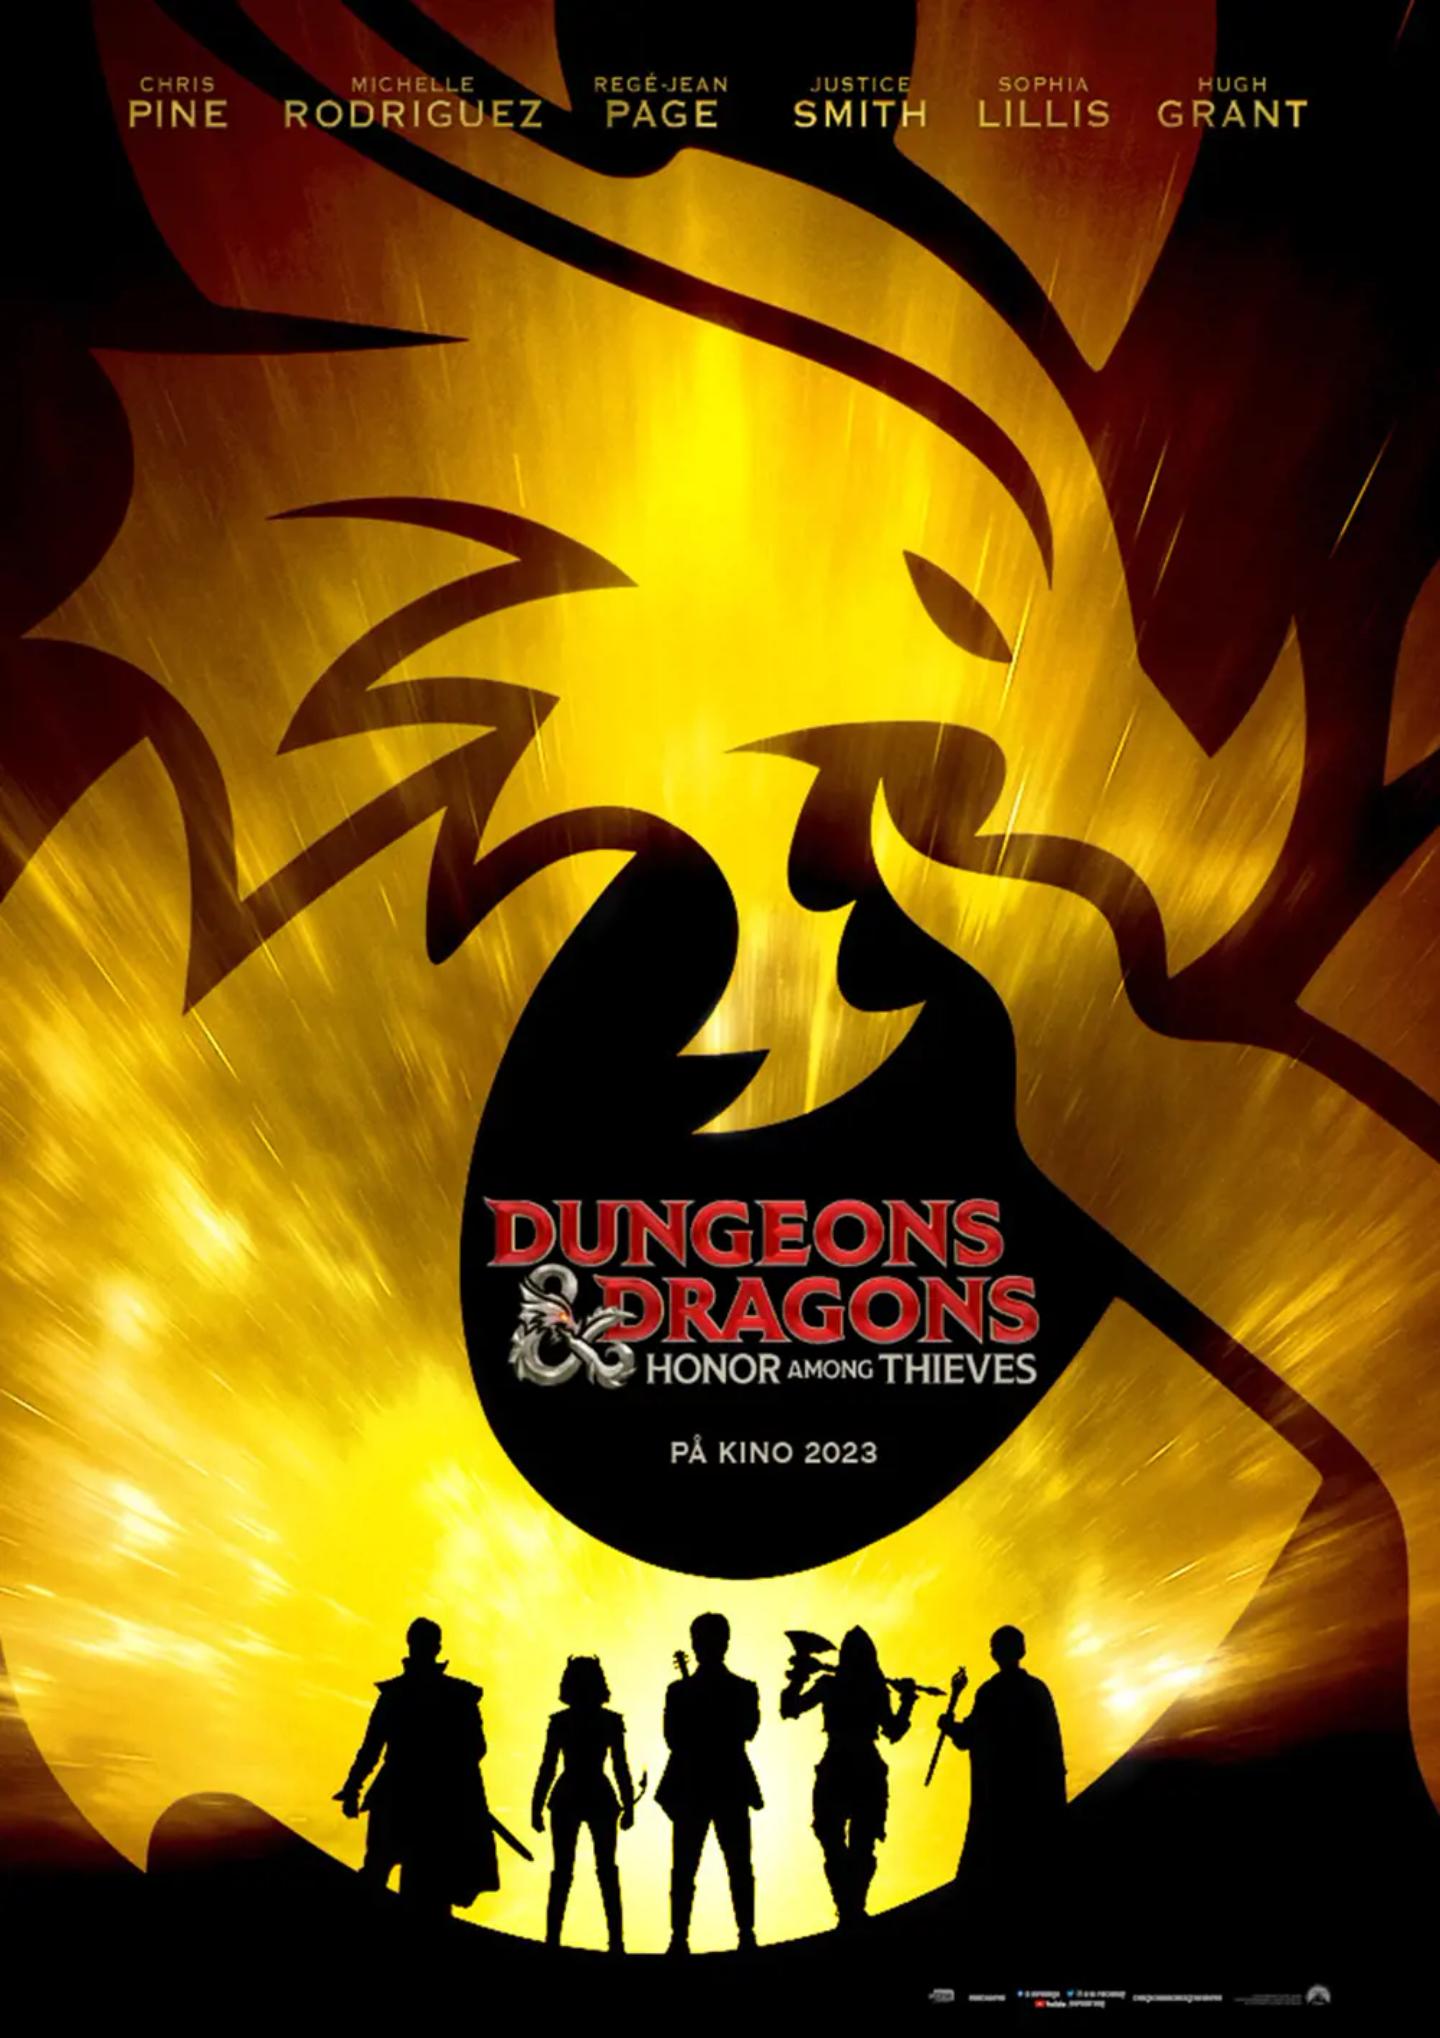 Plakat for 'Dungeons & Dragons: Honor Among Thieves'